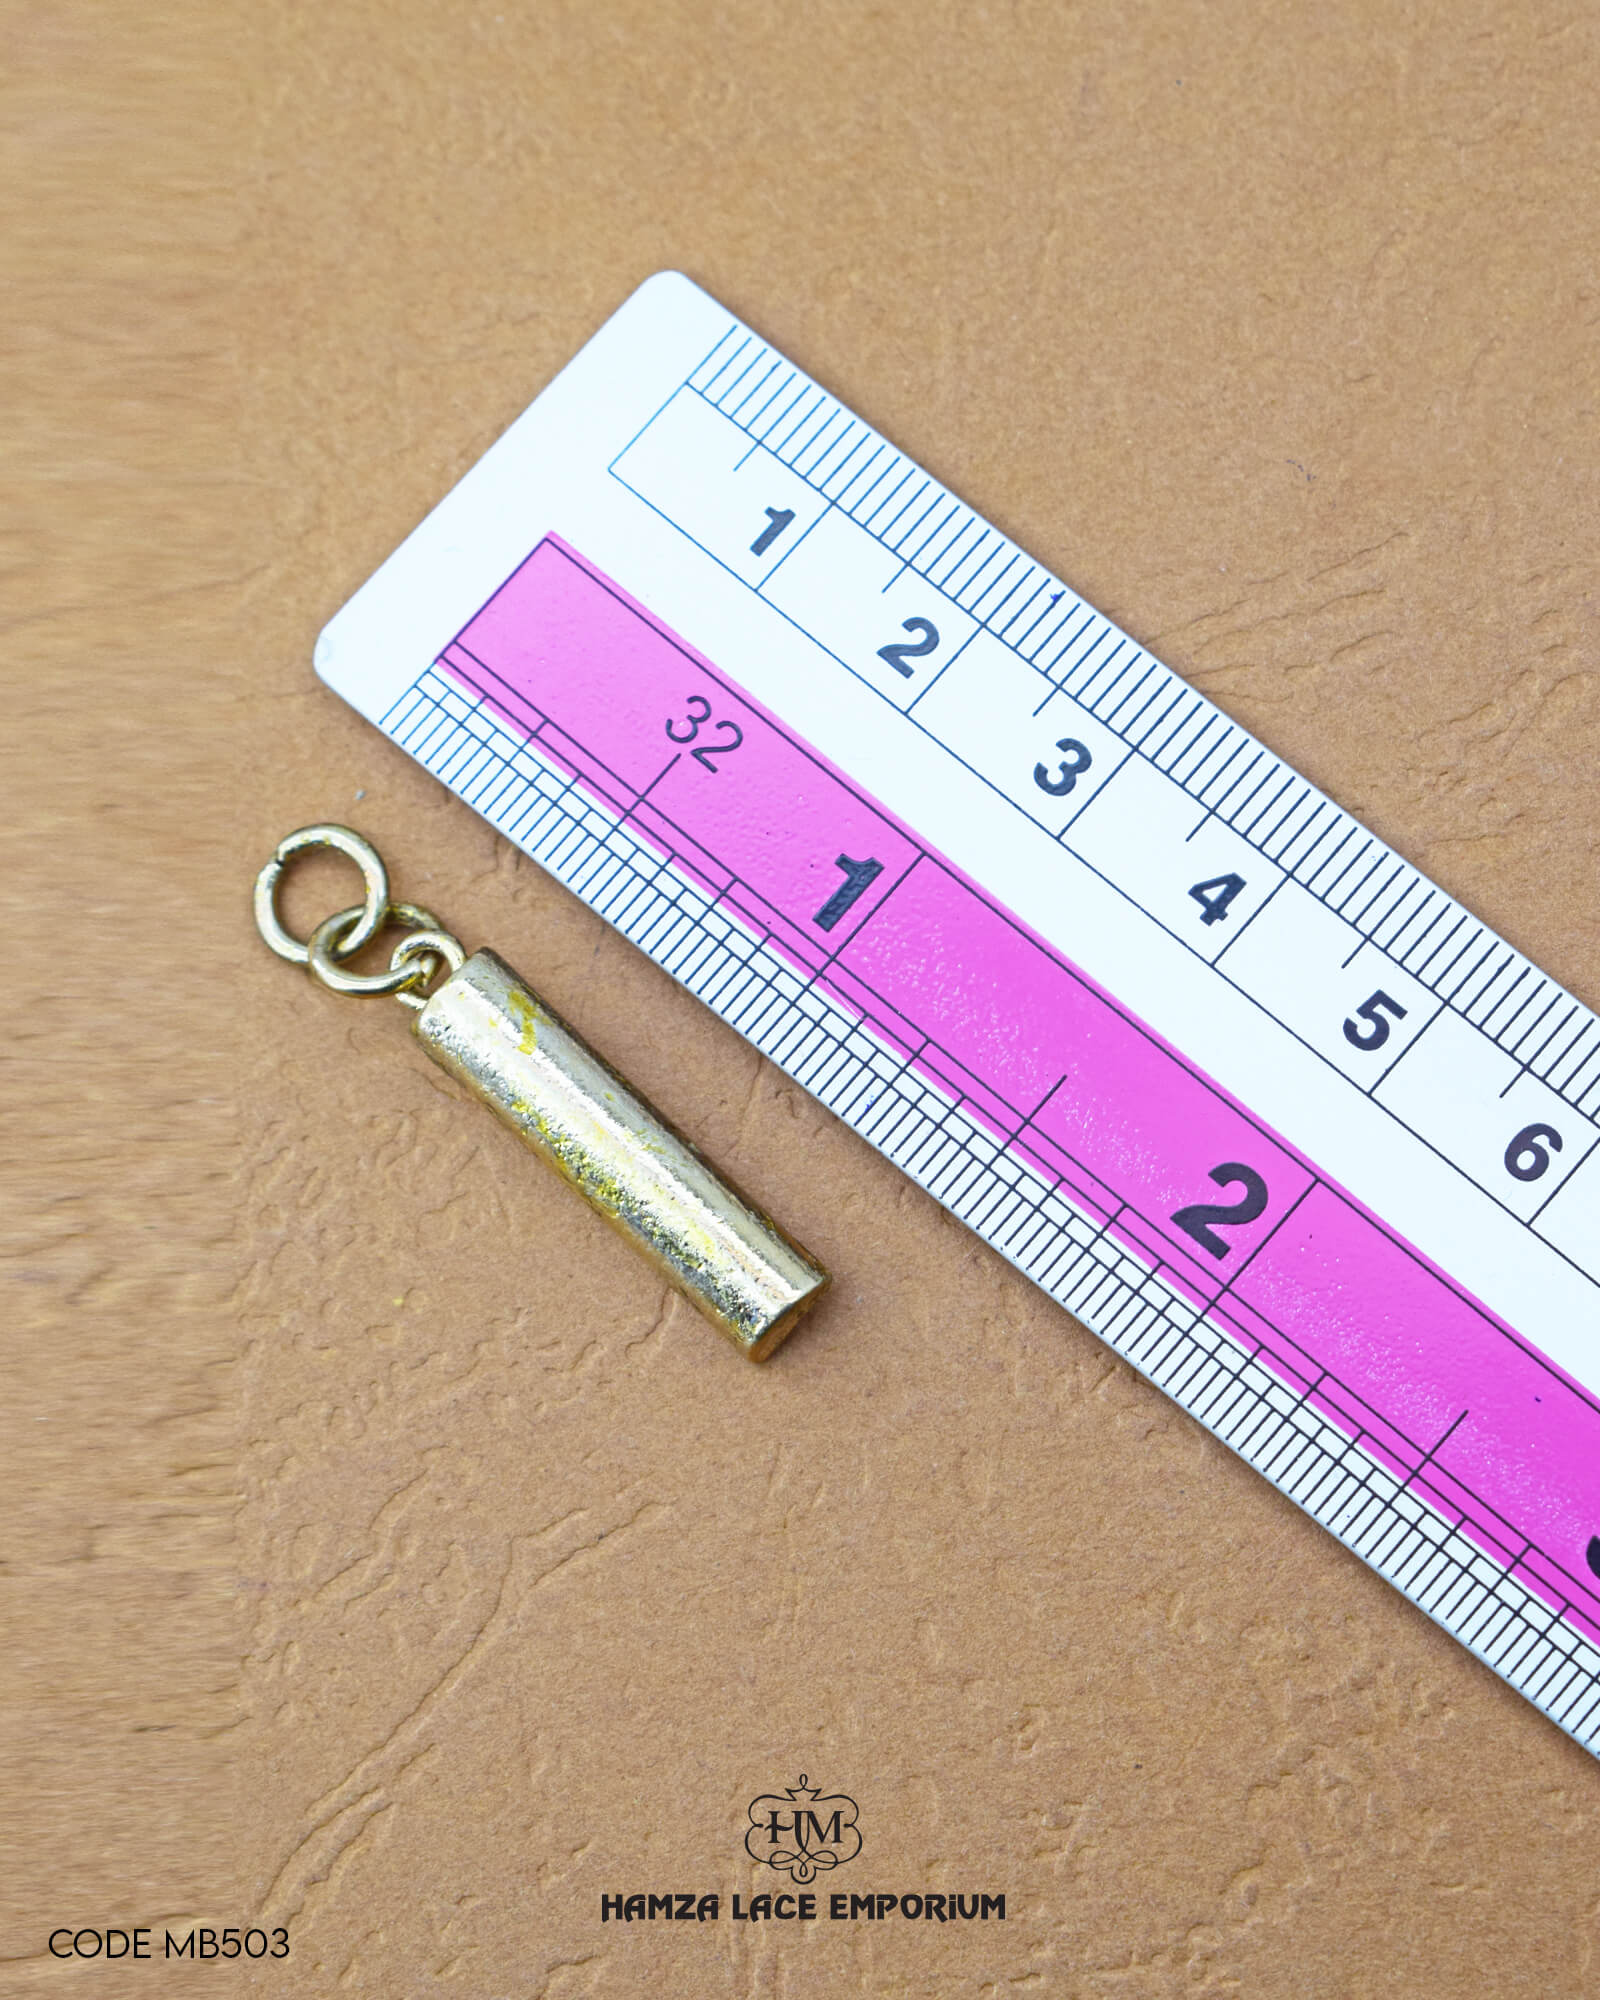 The dimensions of the 'Hanging Metal Button MB503' are determined using a ruler.